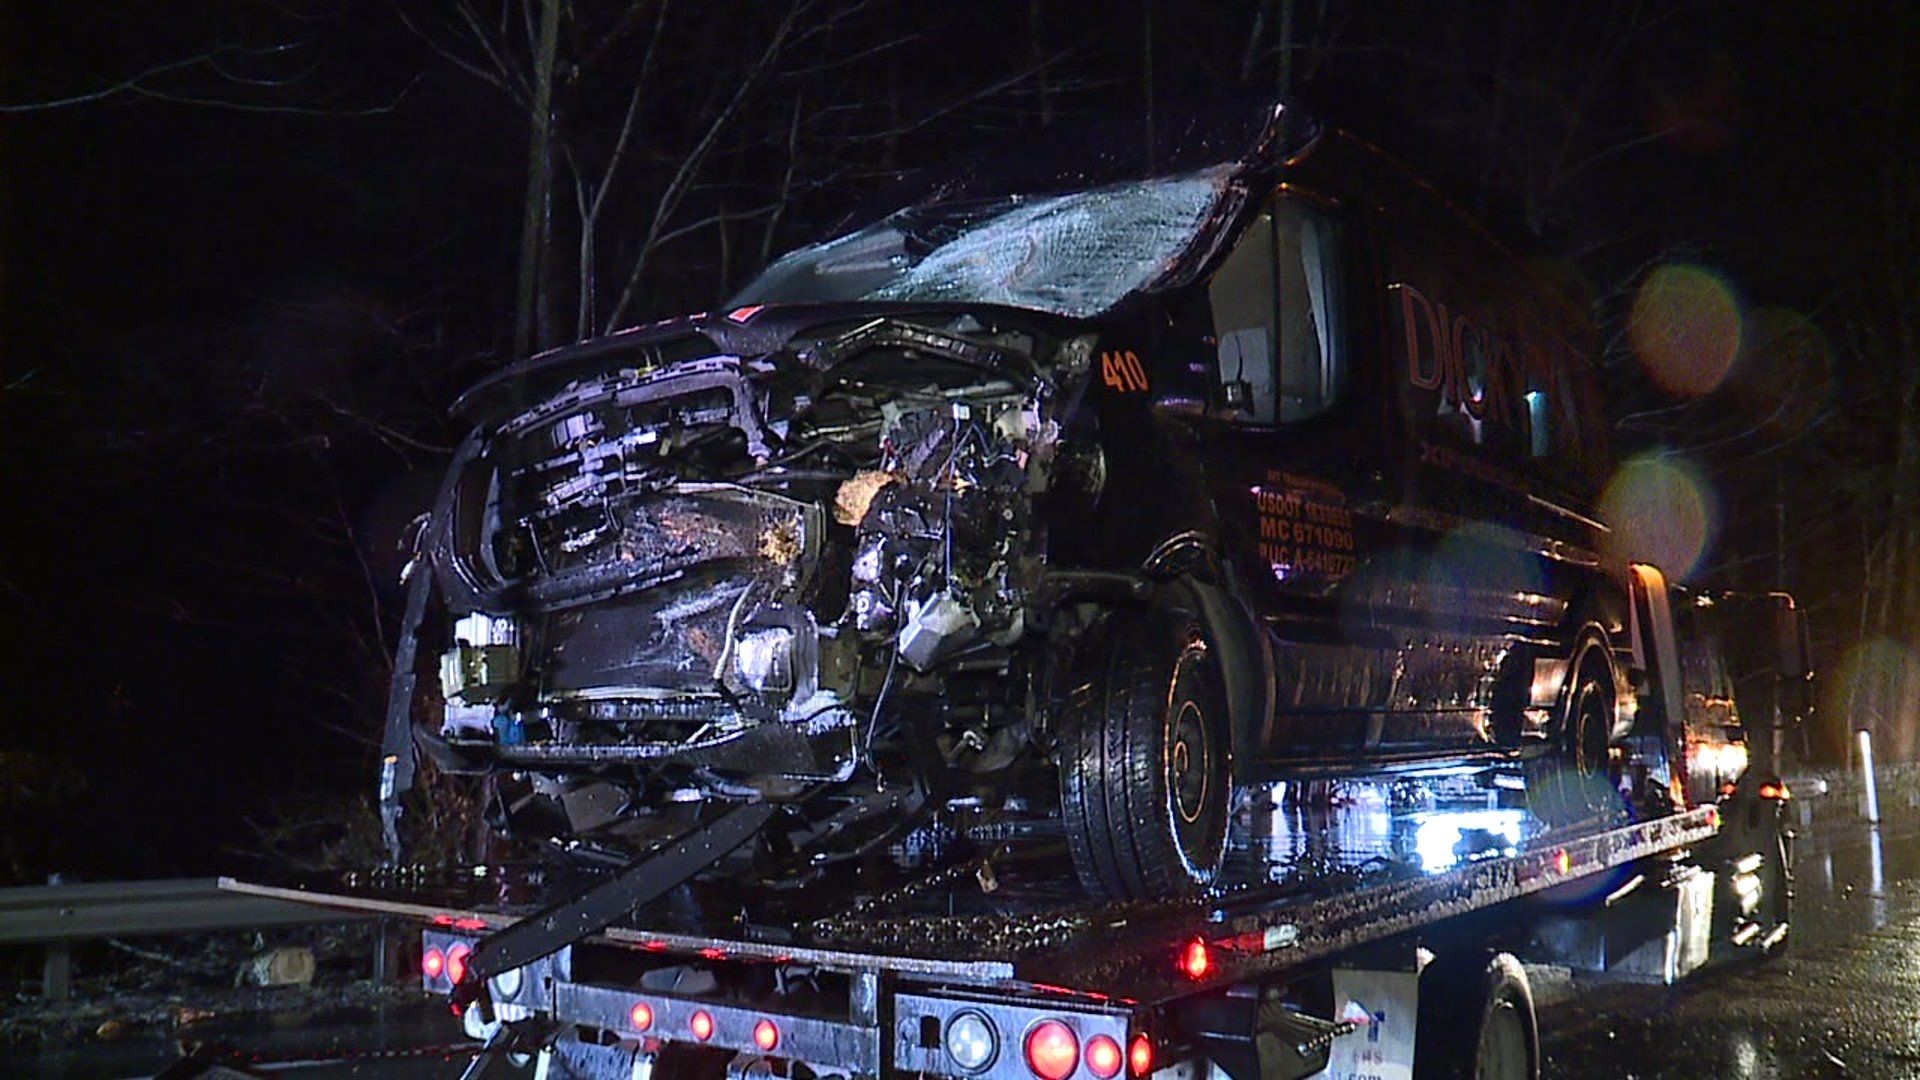 One Badly Hurt After Crash in Luzerne County